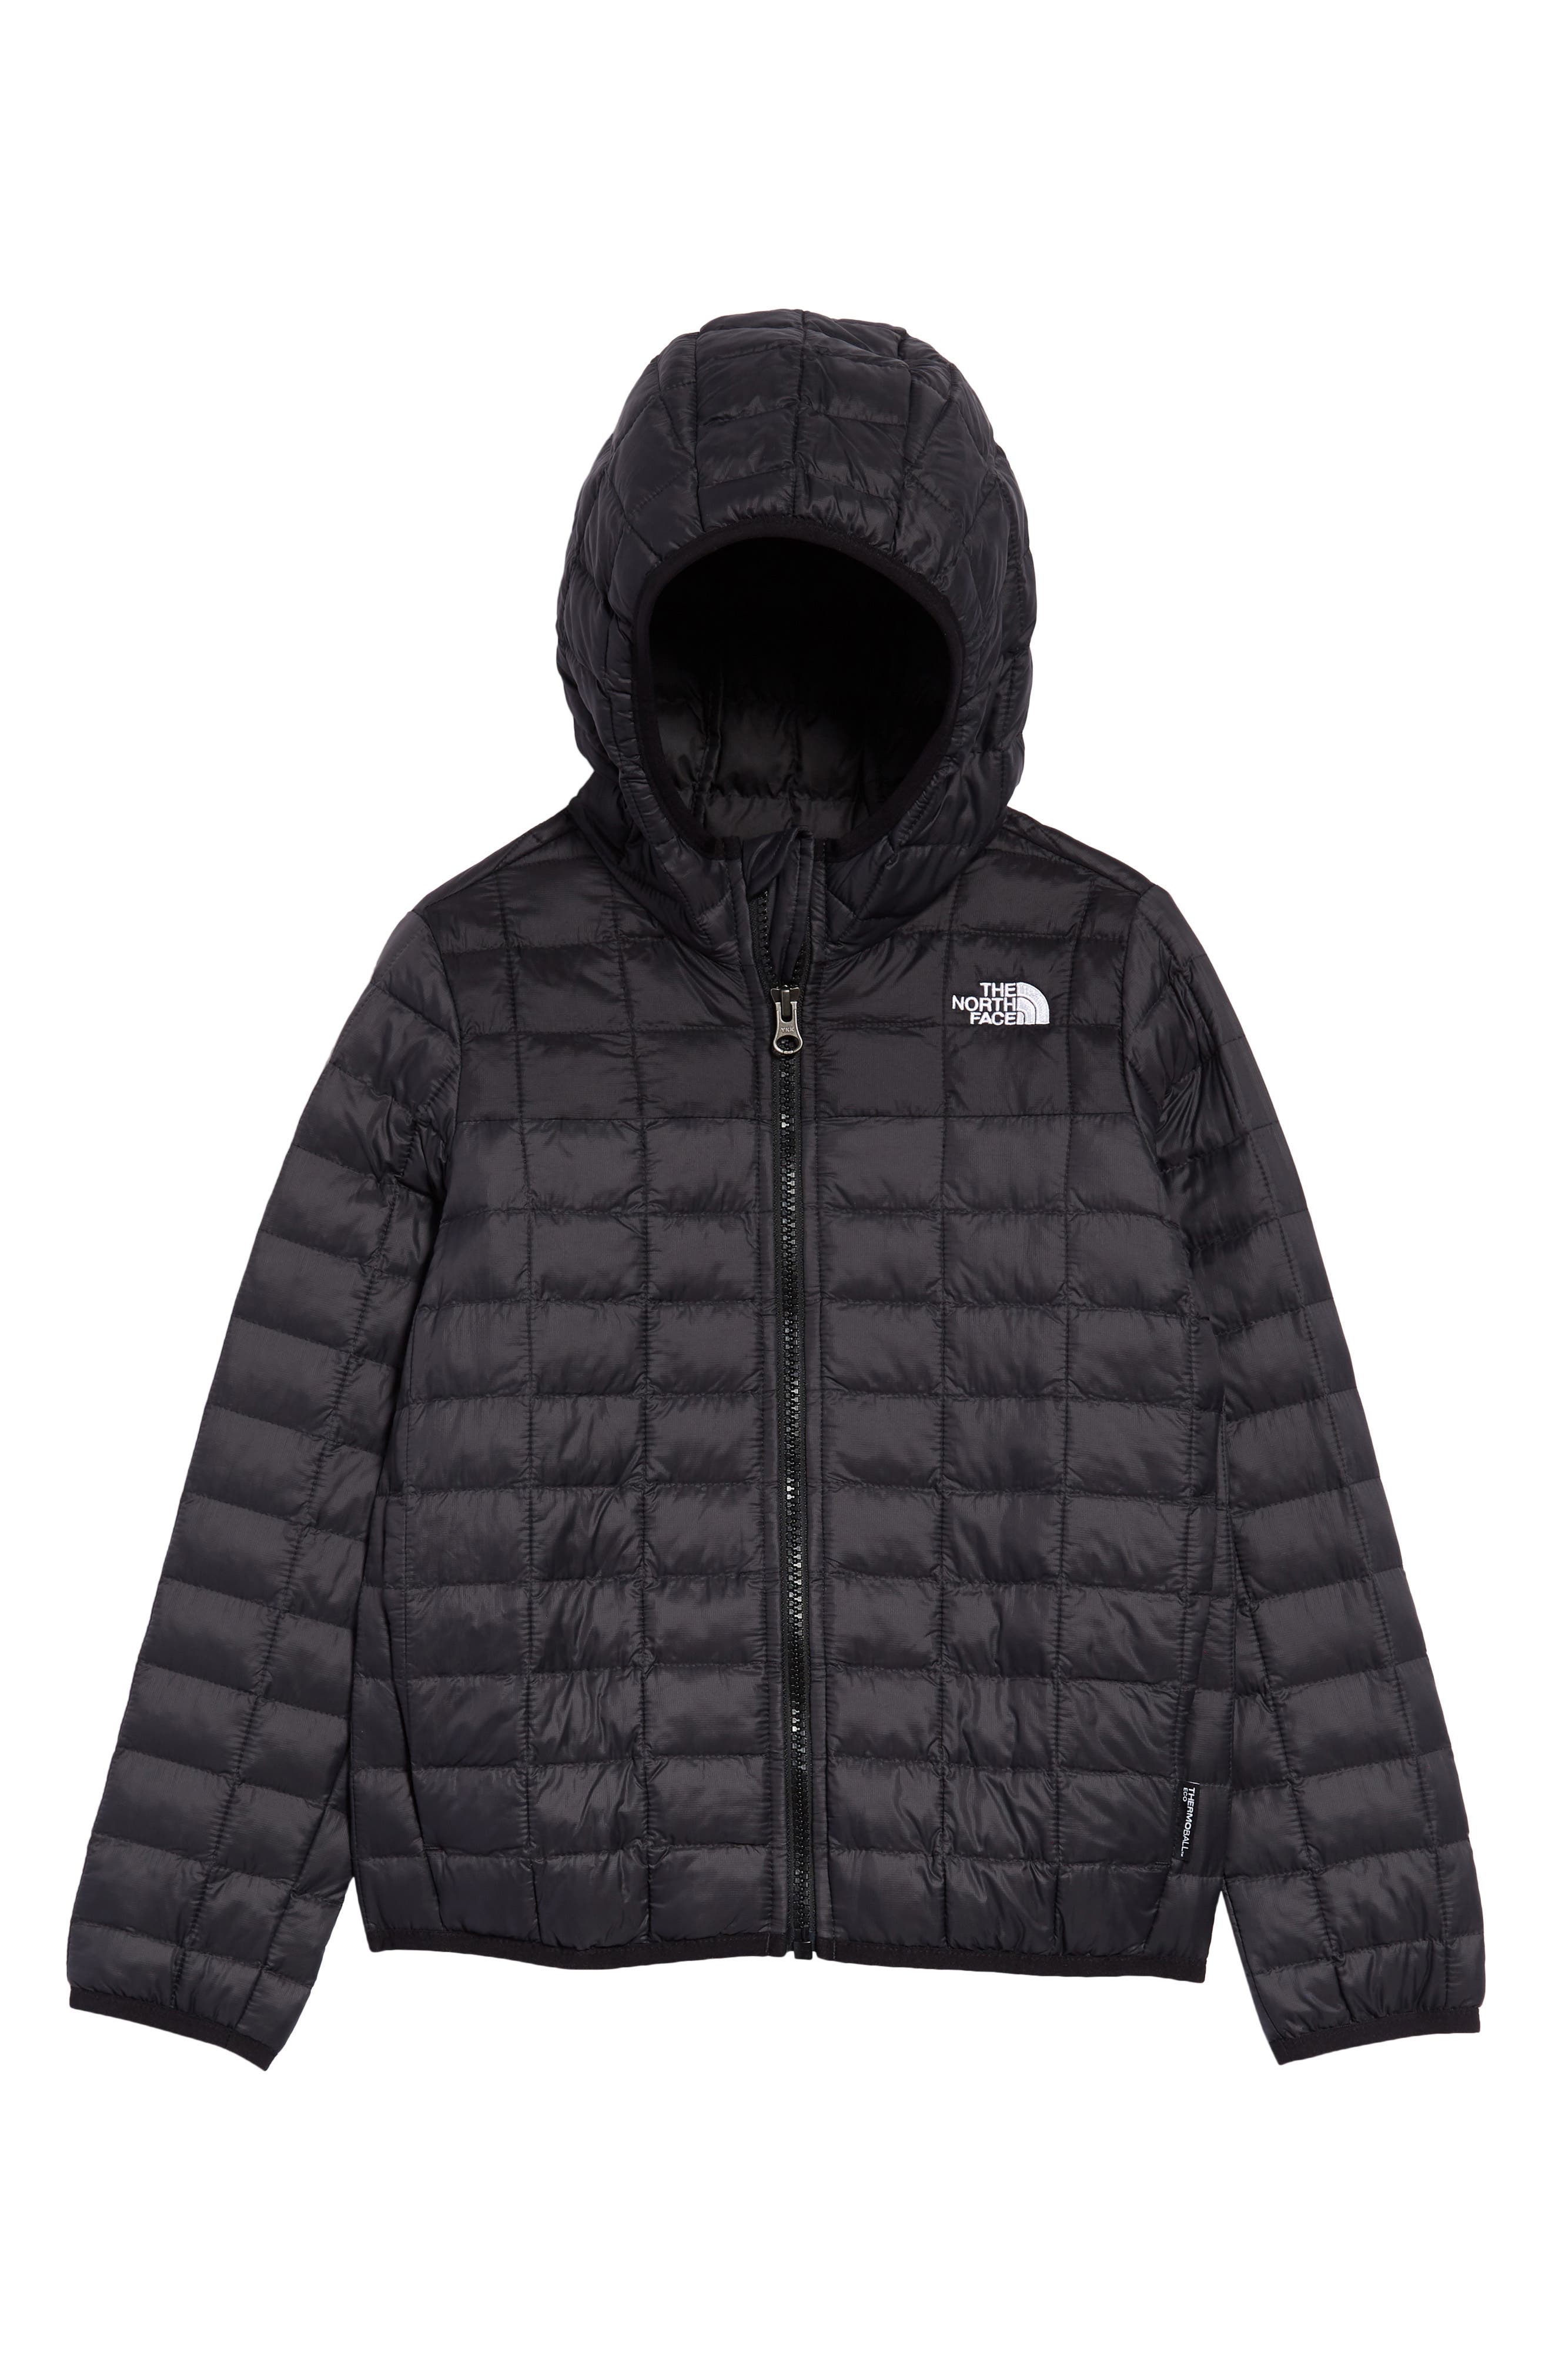 north face toddler jacket 2t